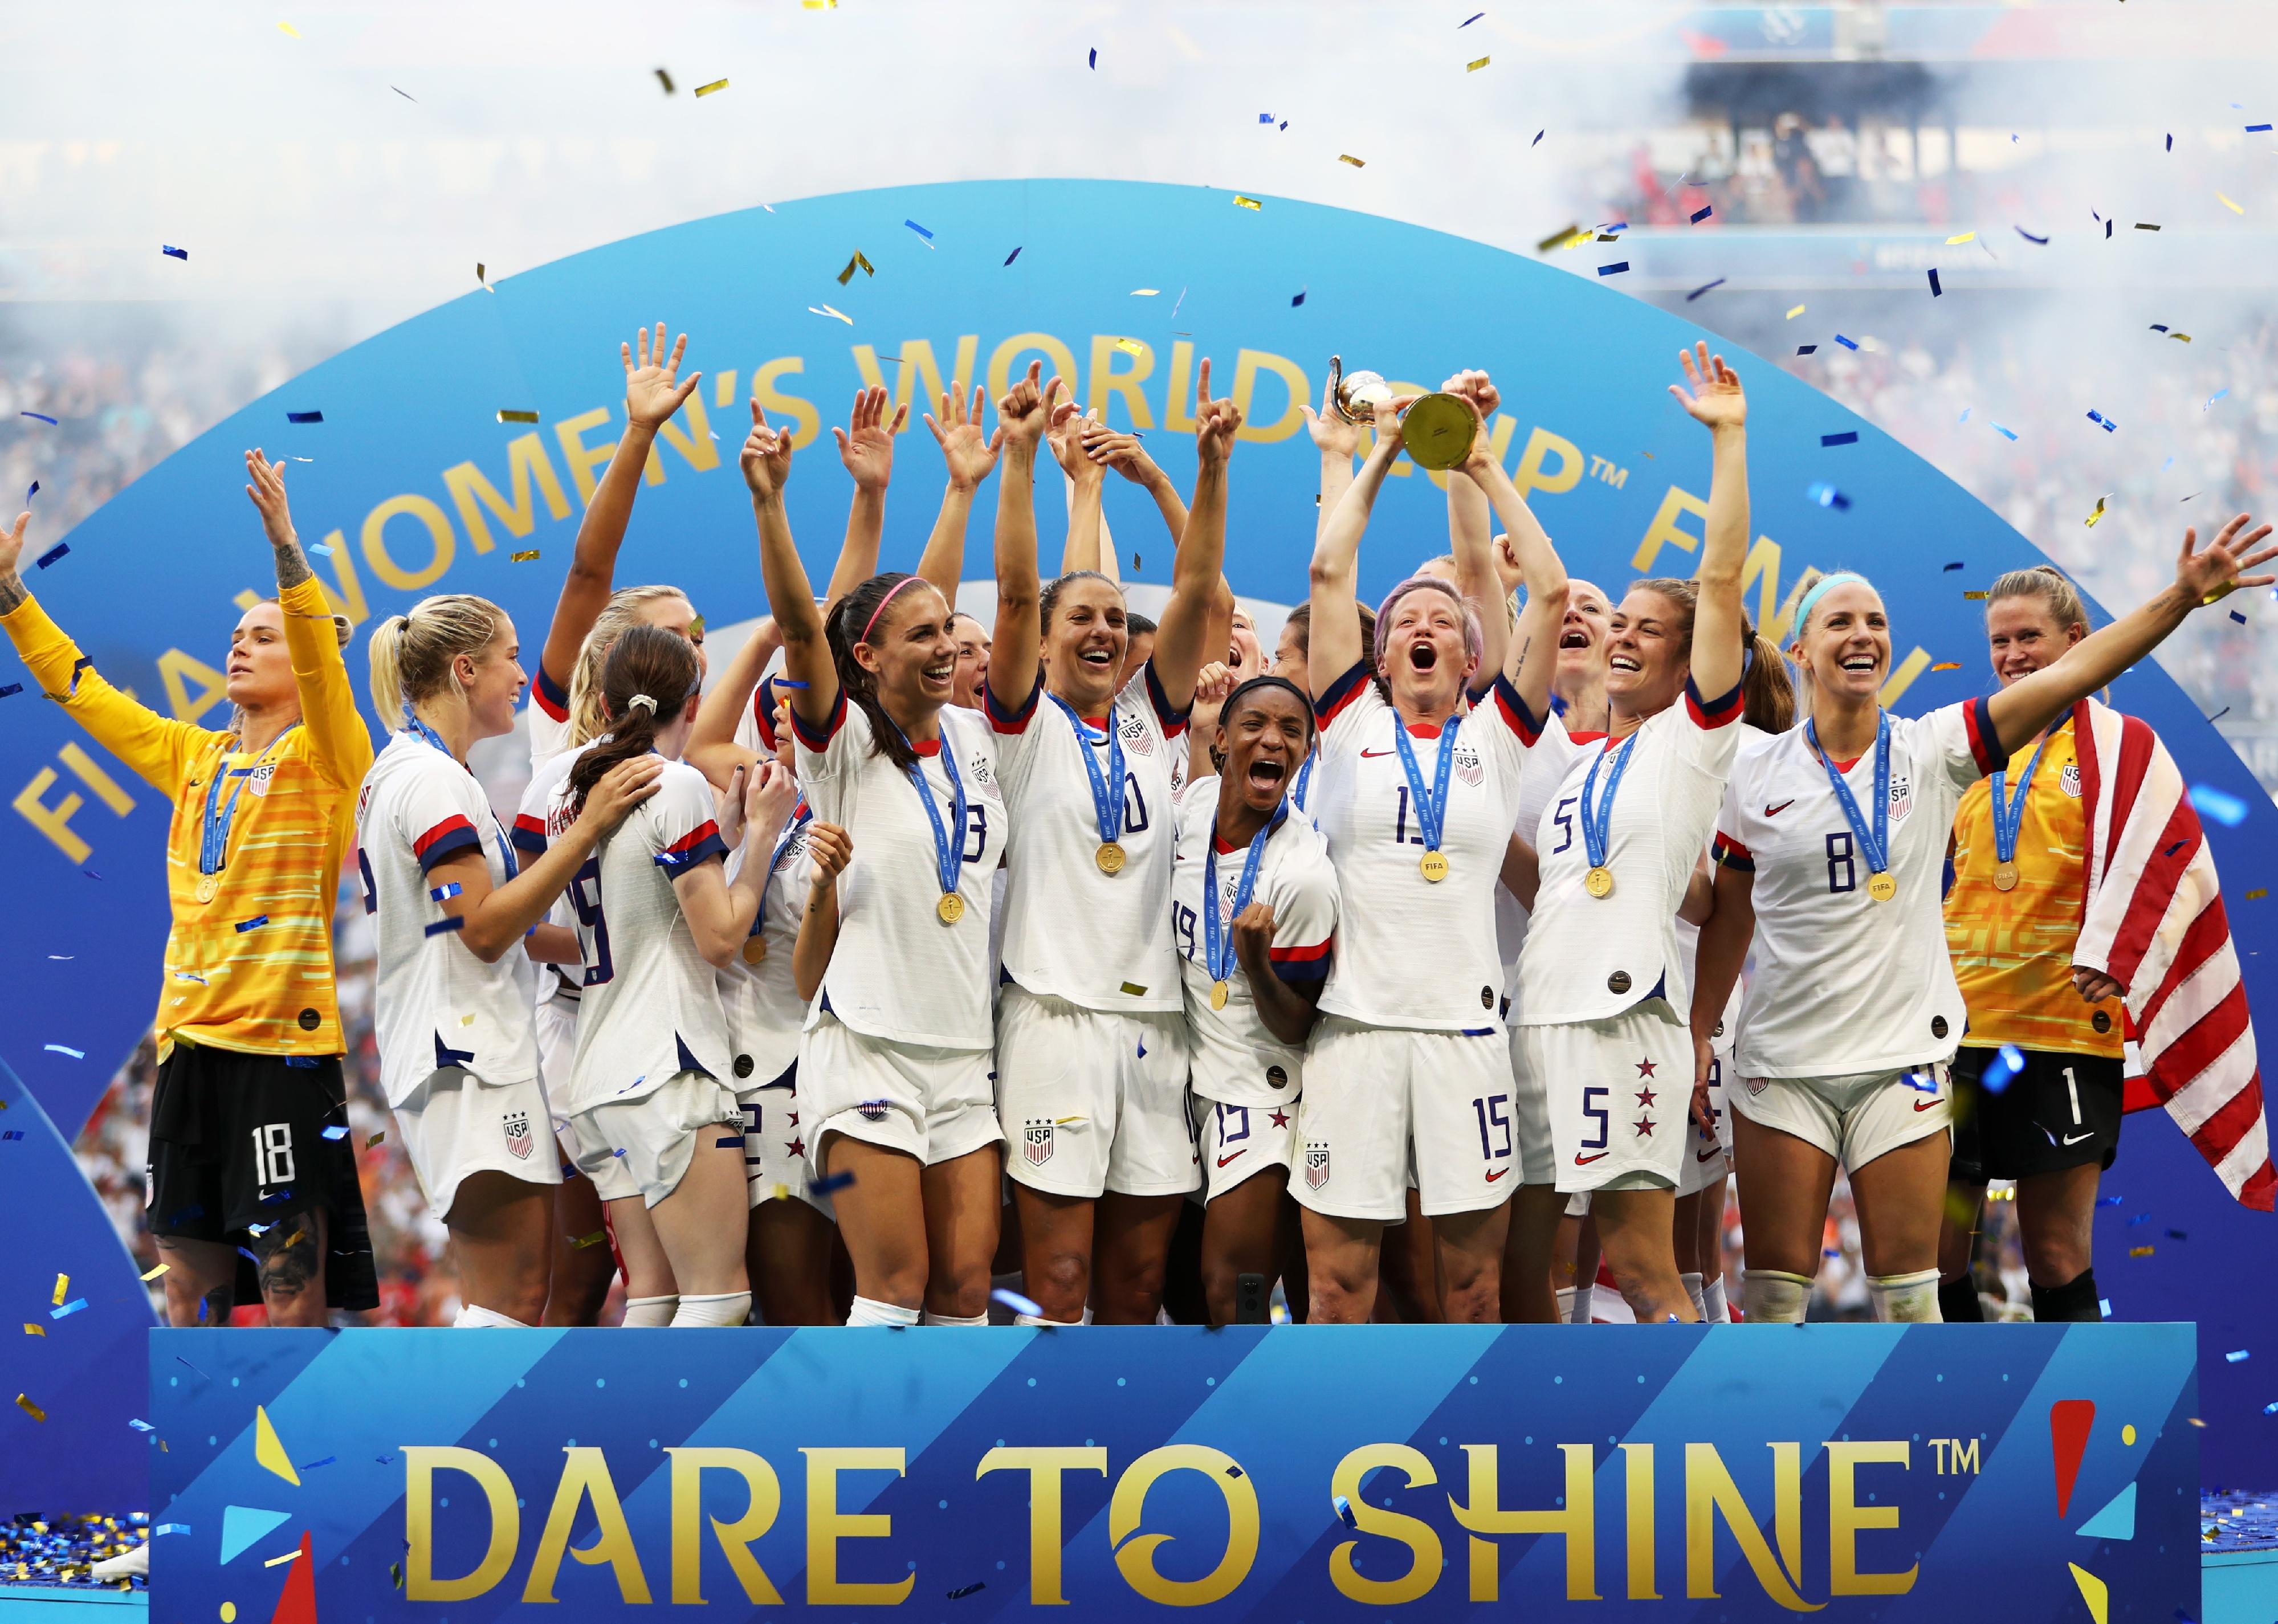 Players from U.S. lift the FIFA Women's World Cup Trophy following the team's victory during the 2019 FIFA Women's World Cup France Final match.